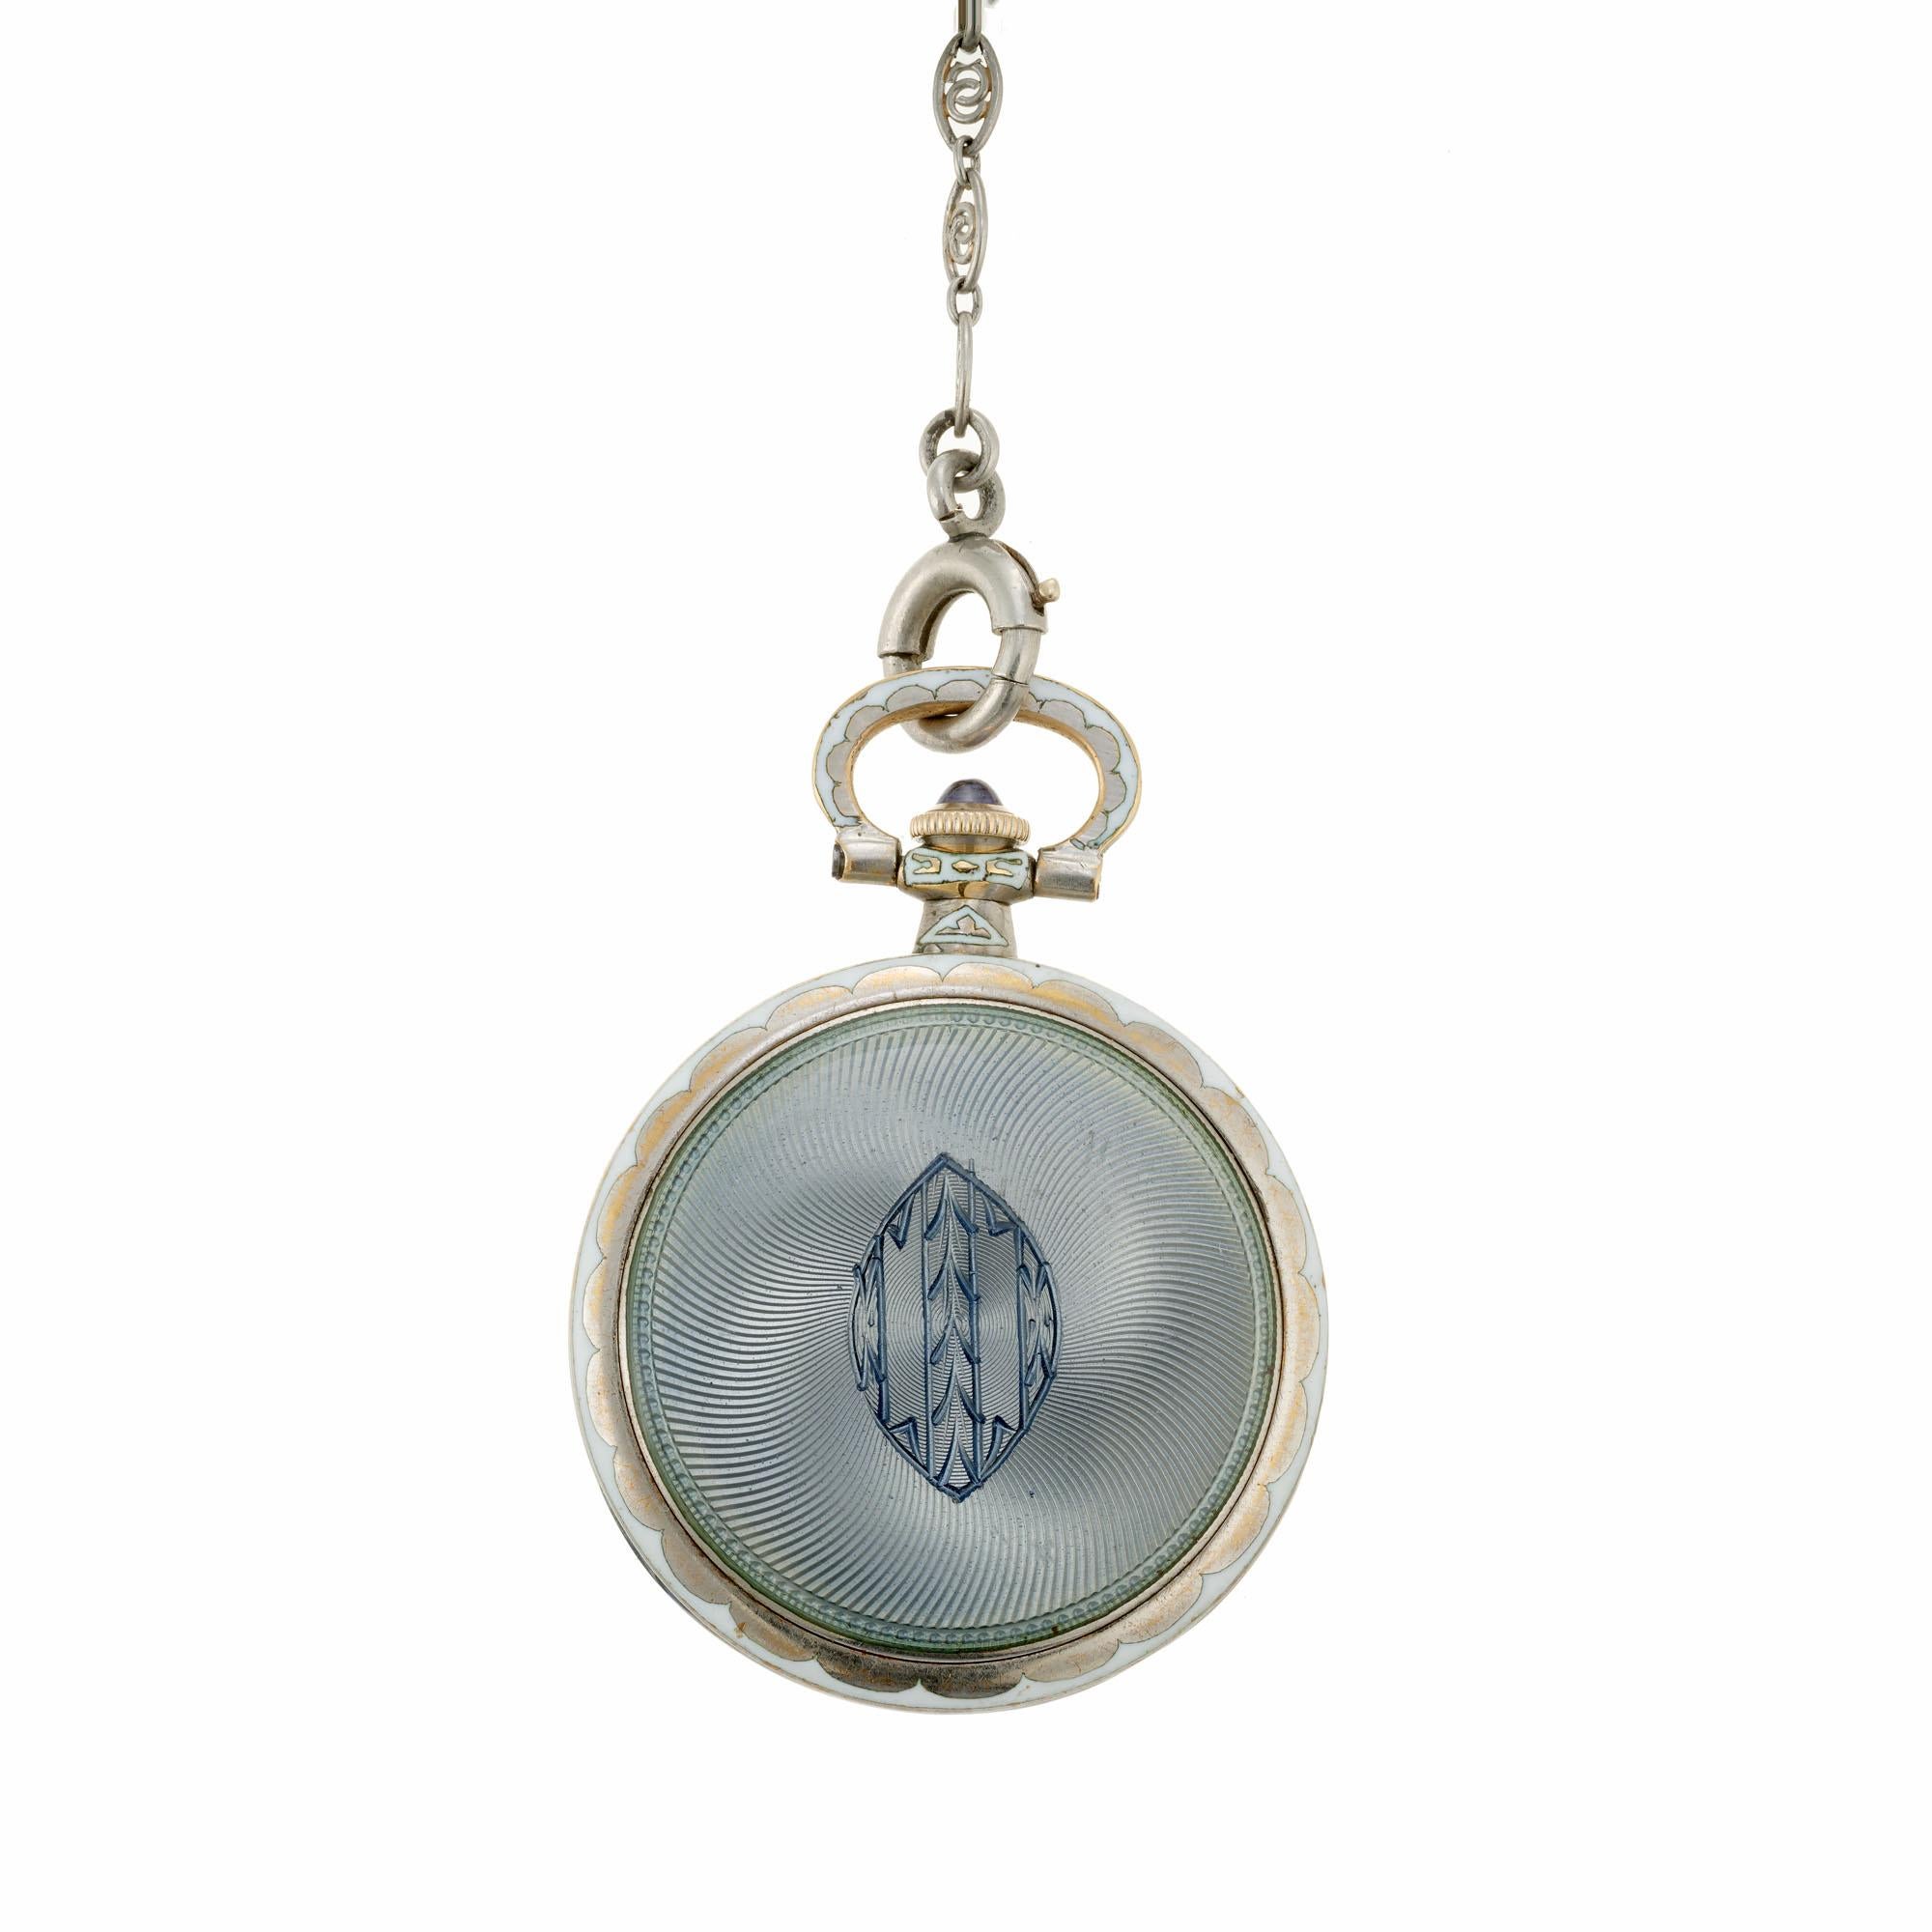 Longines enamel pendant watch. Gray blue and white enamel and gold face, with a matching 22 inch chain. Circa 1912. 

14k white gold
21.9 grams
Tested: 14k
14k white gold
Length: 22 Inches
Dangle: 2.5 inches
Watch: 1.25 inches
Width: 2.03mm
Depth: